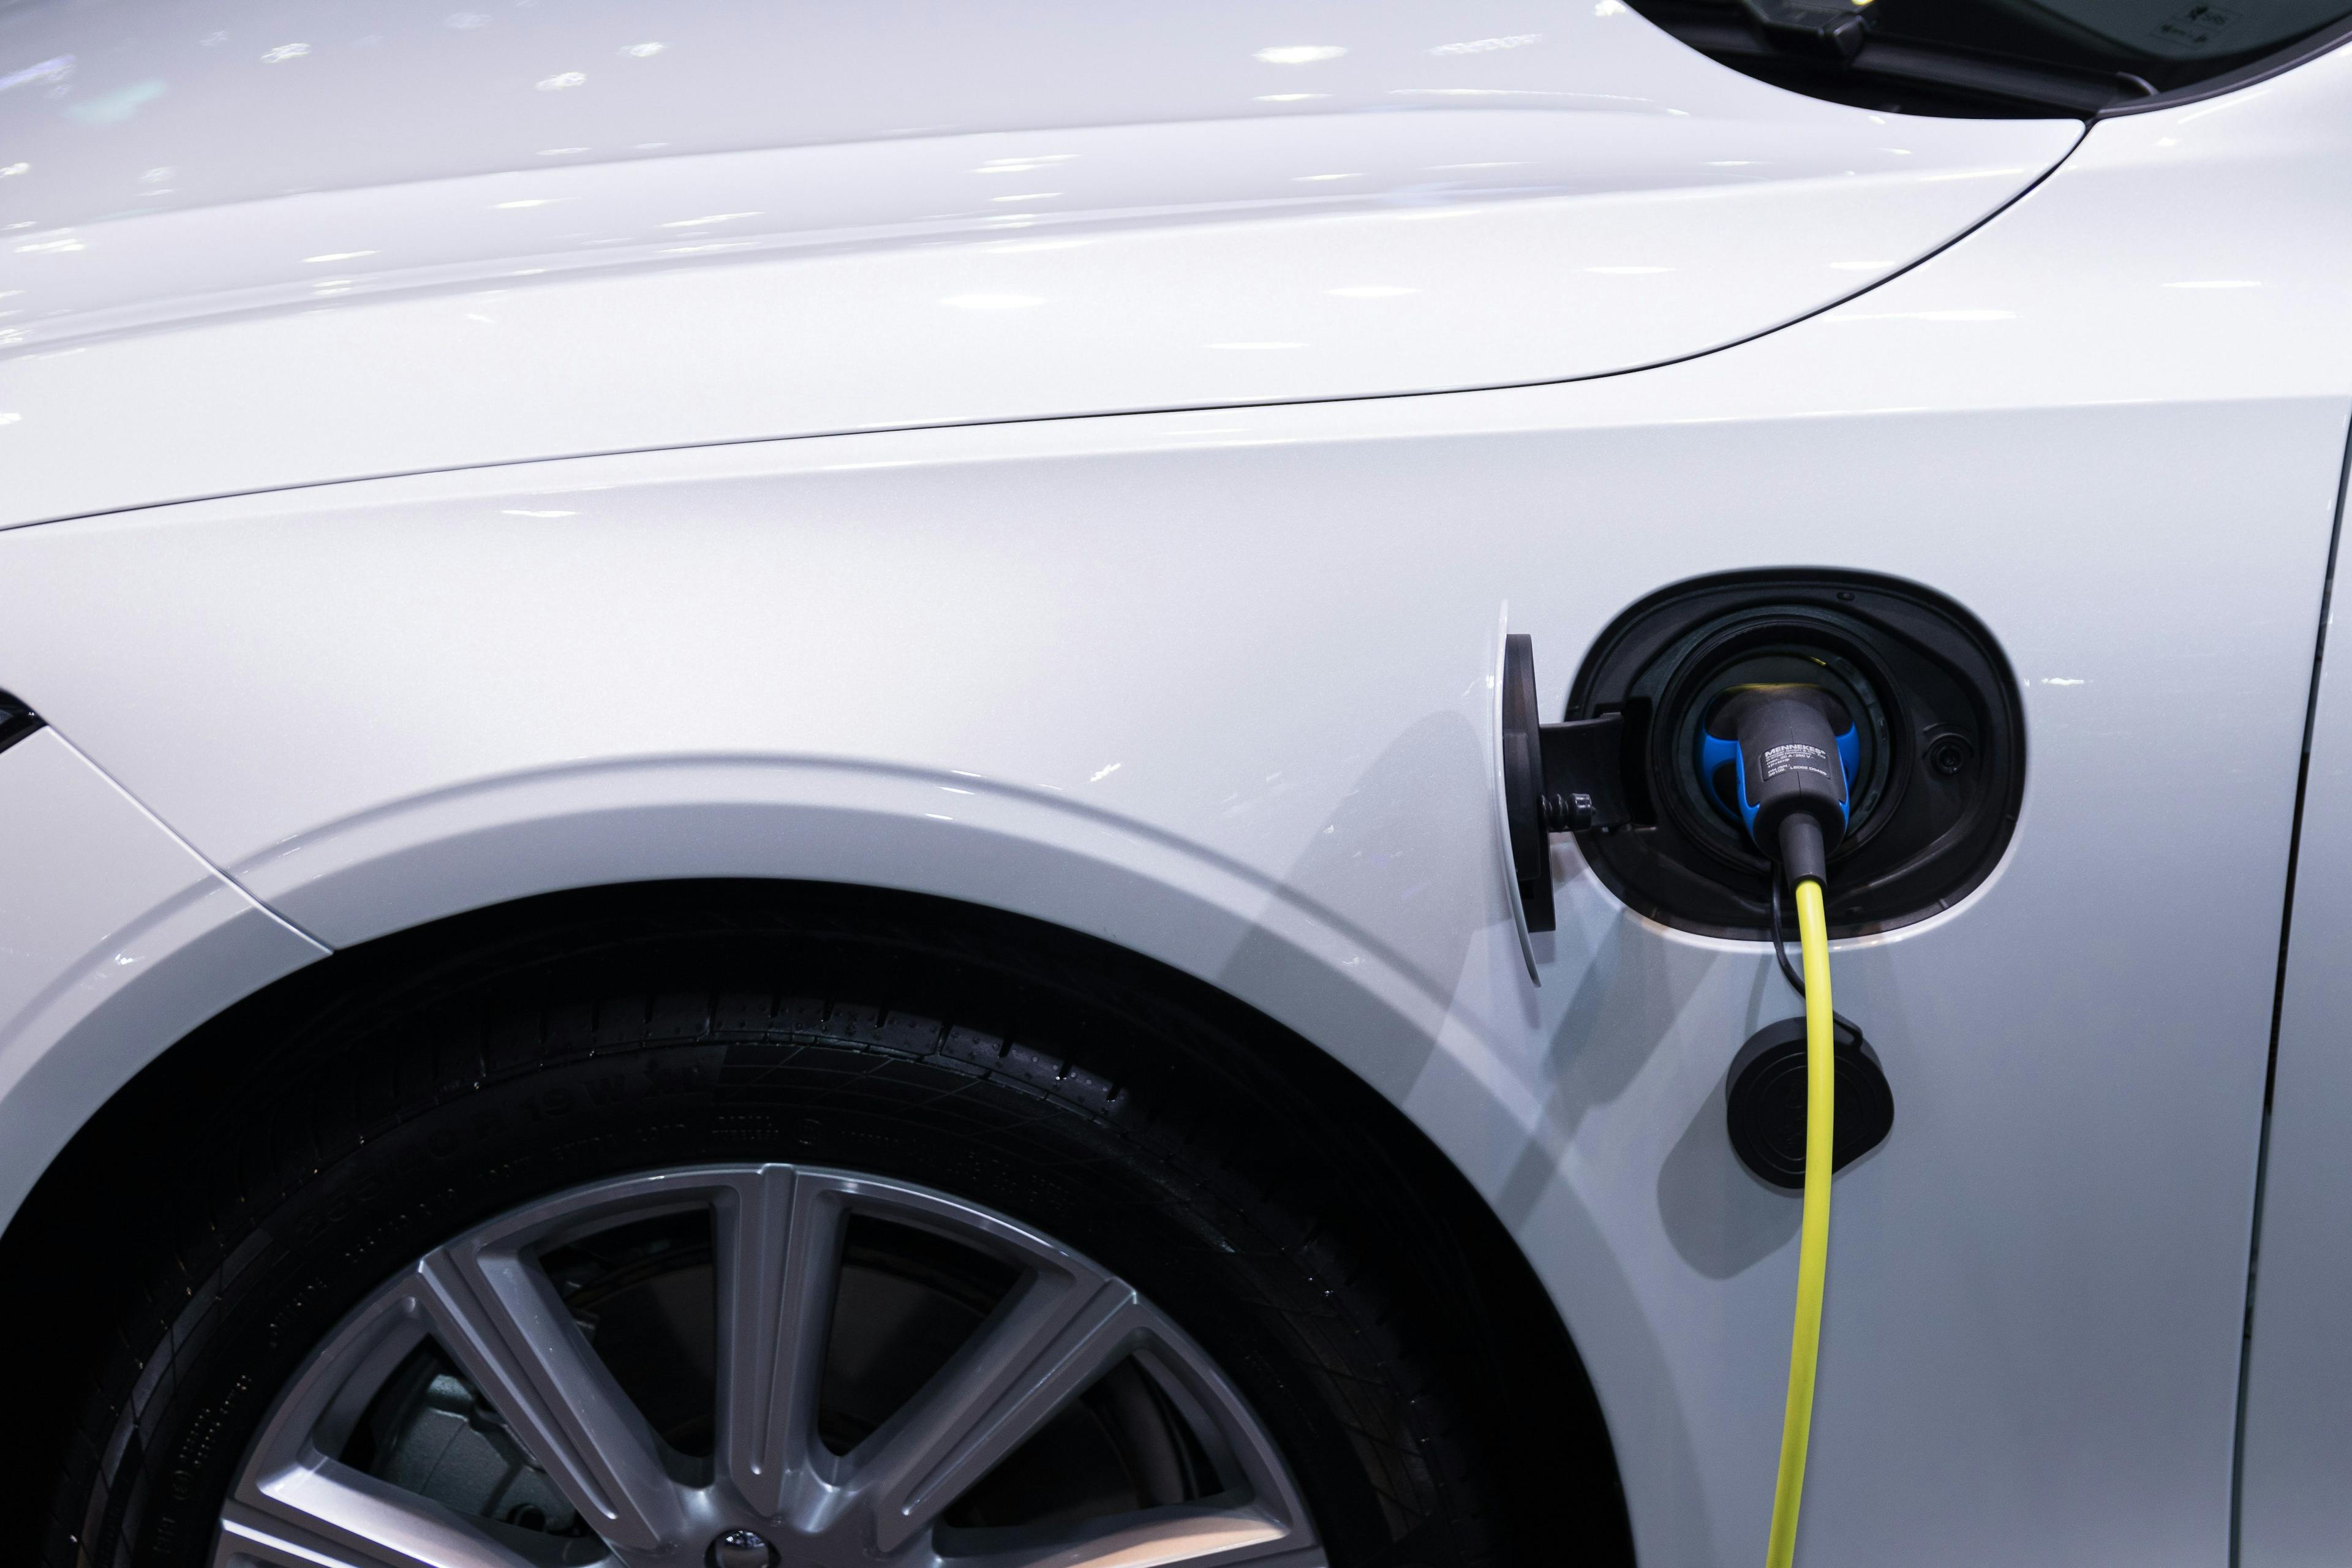 The government will more strongly support the electric vehicle sector